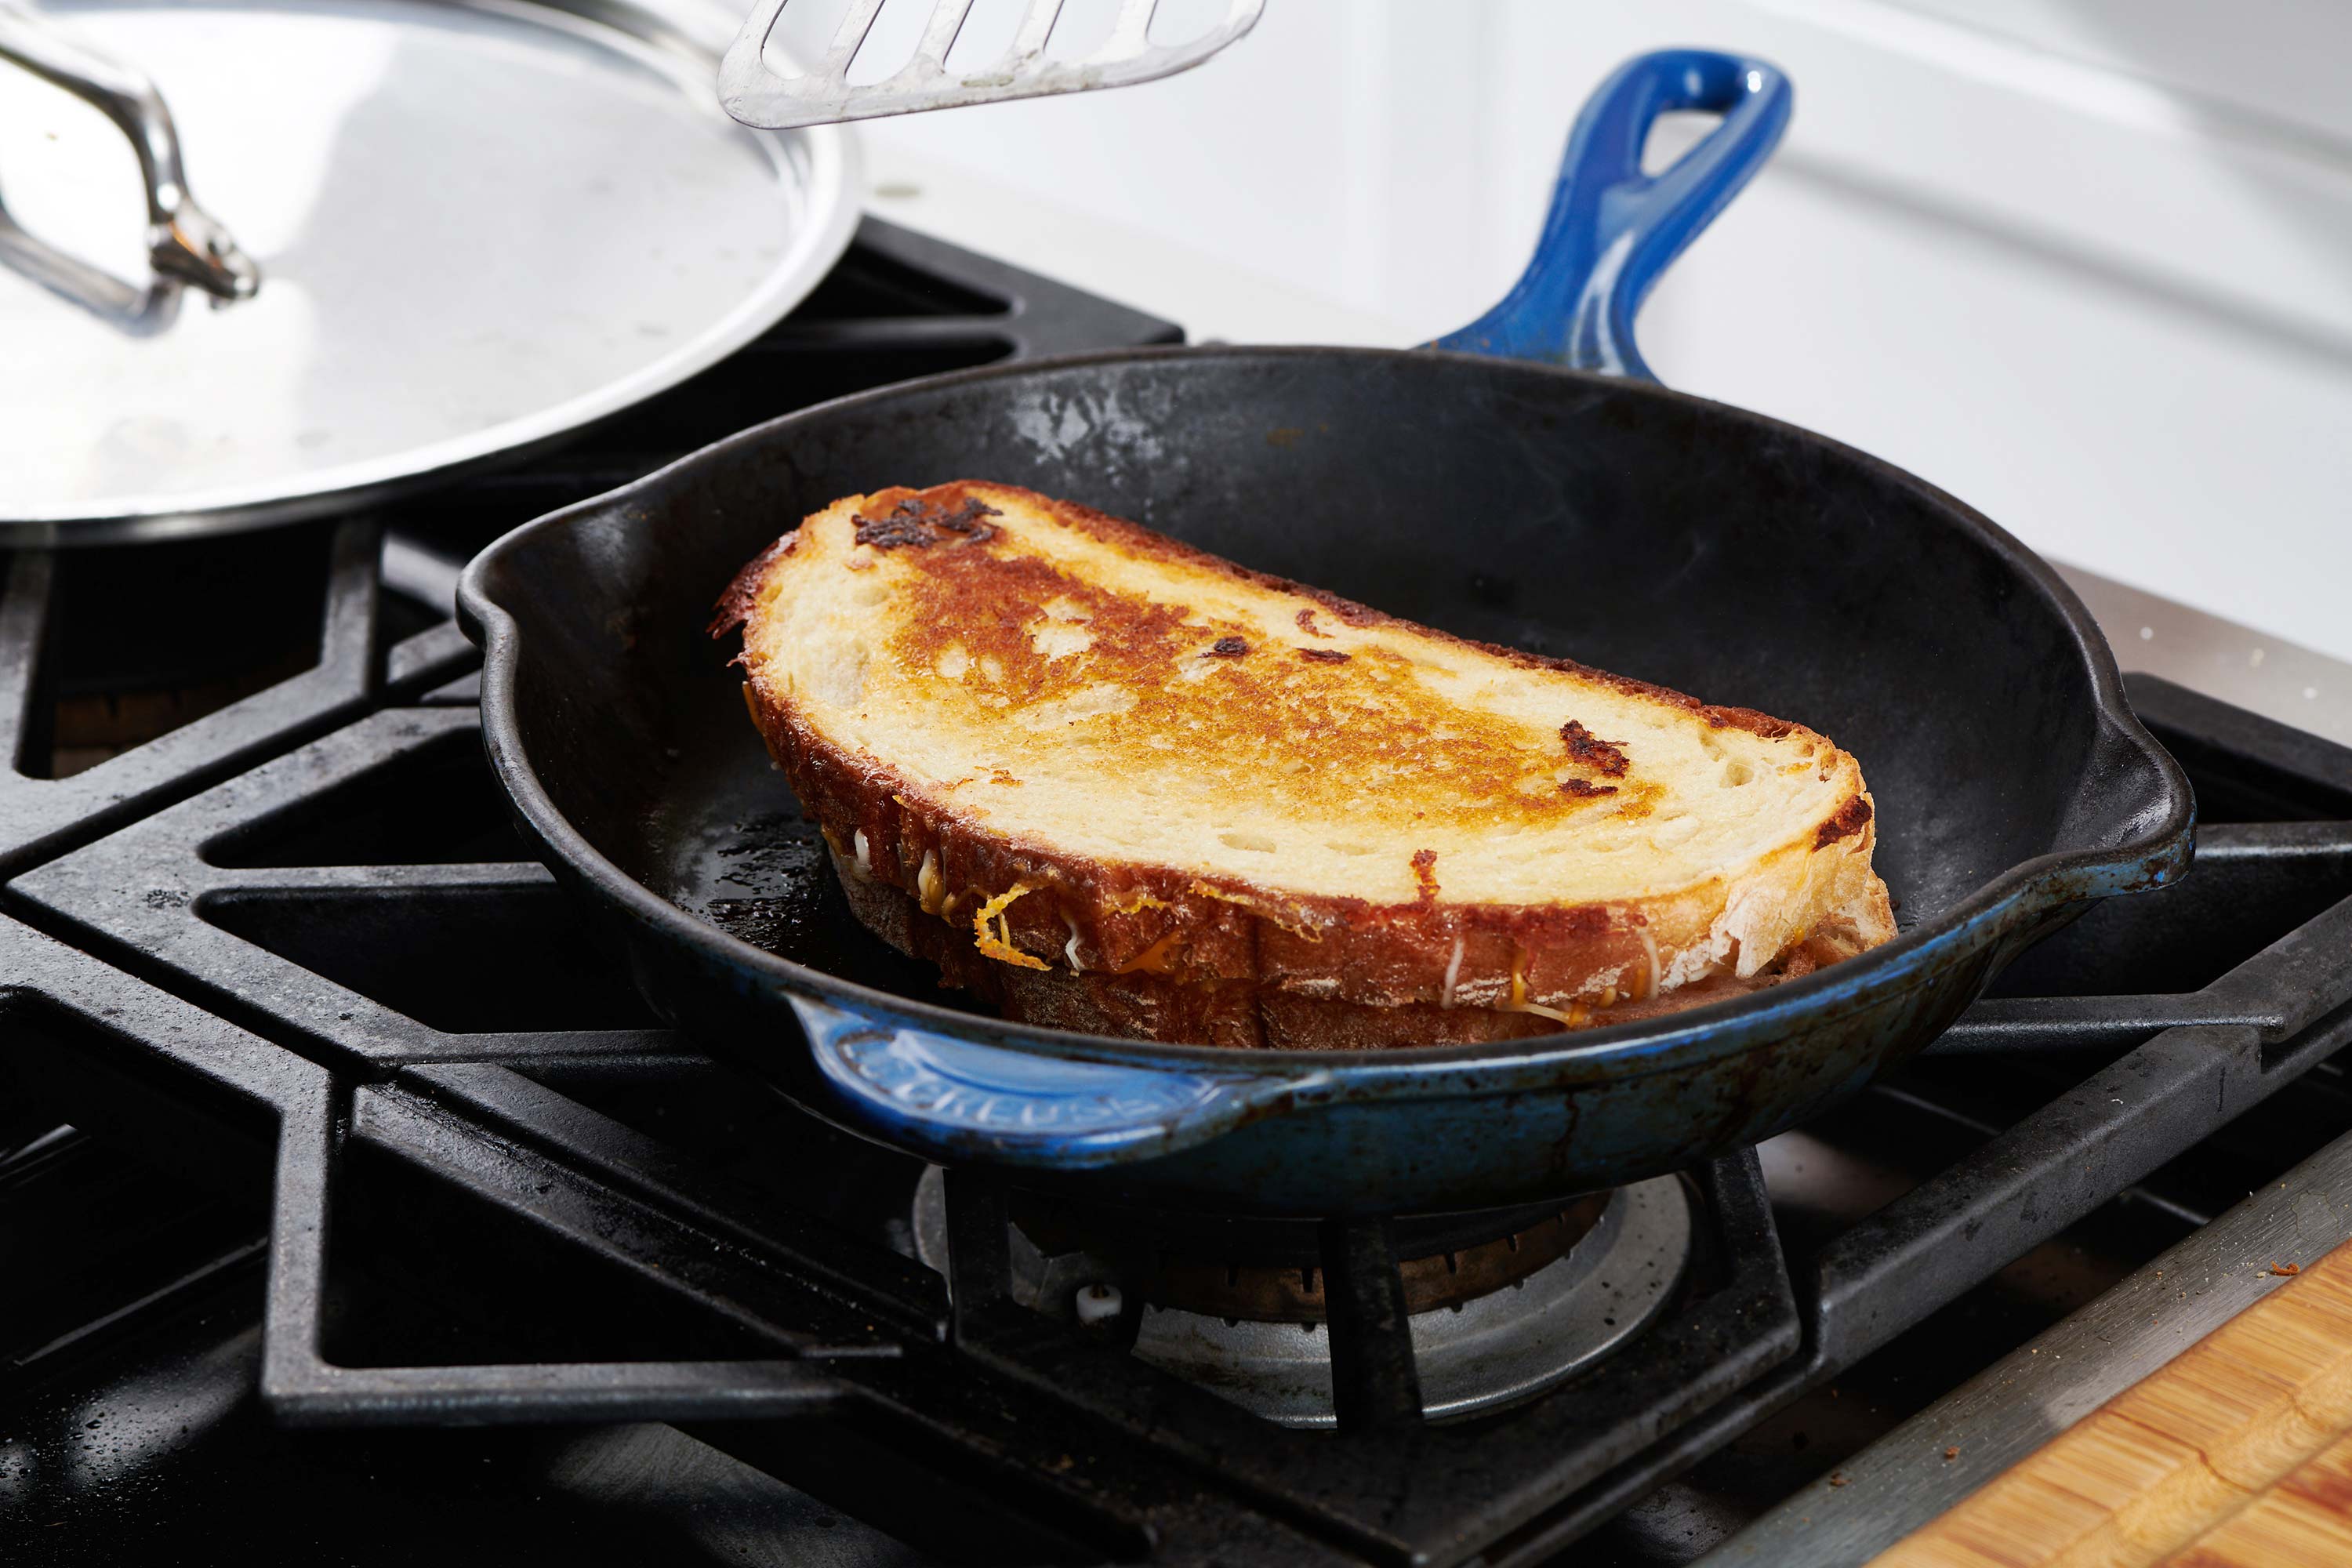 Grilled cheese sandwich in a skillet on the stove.